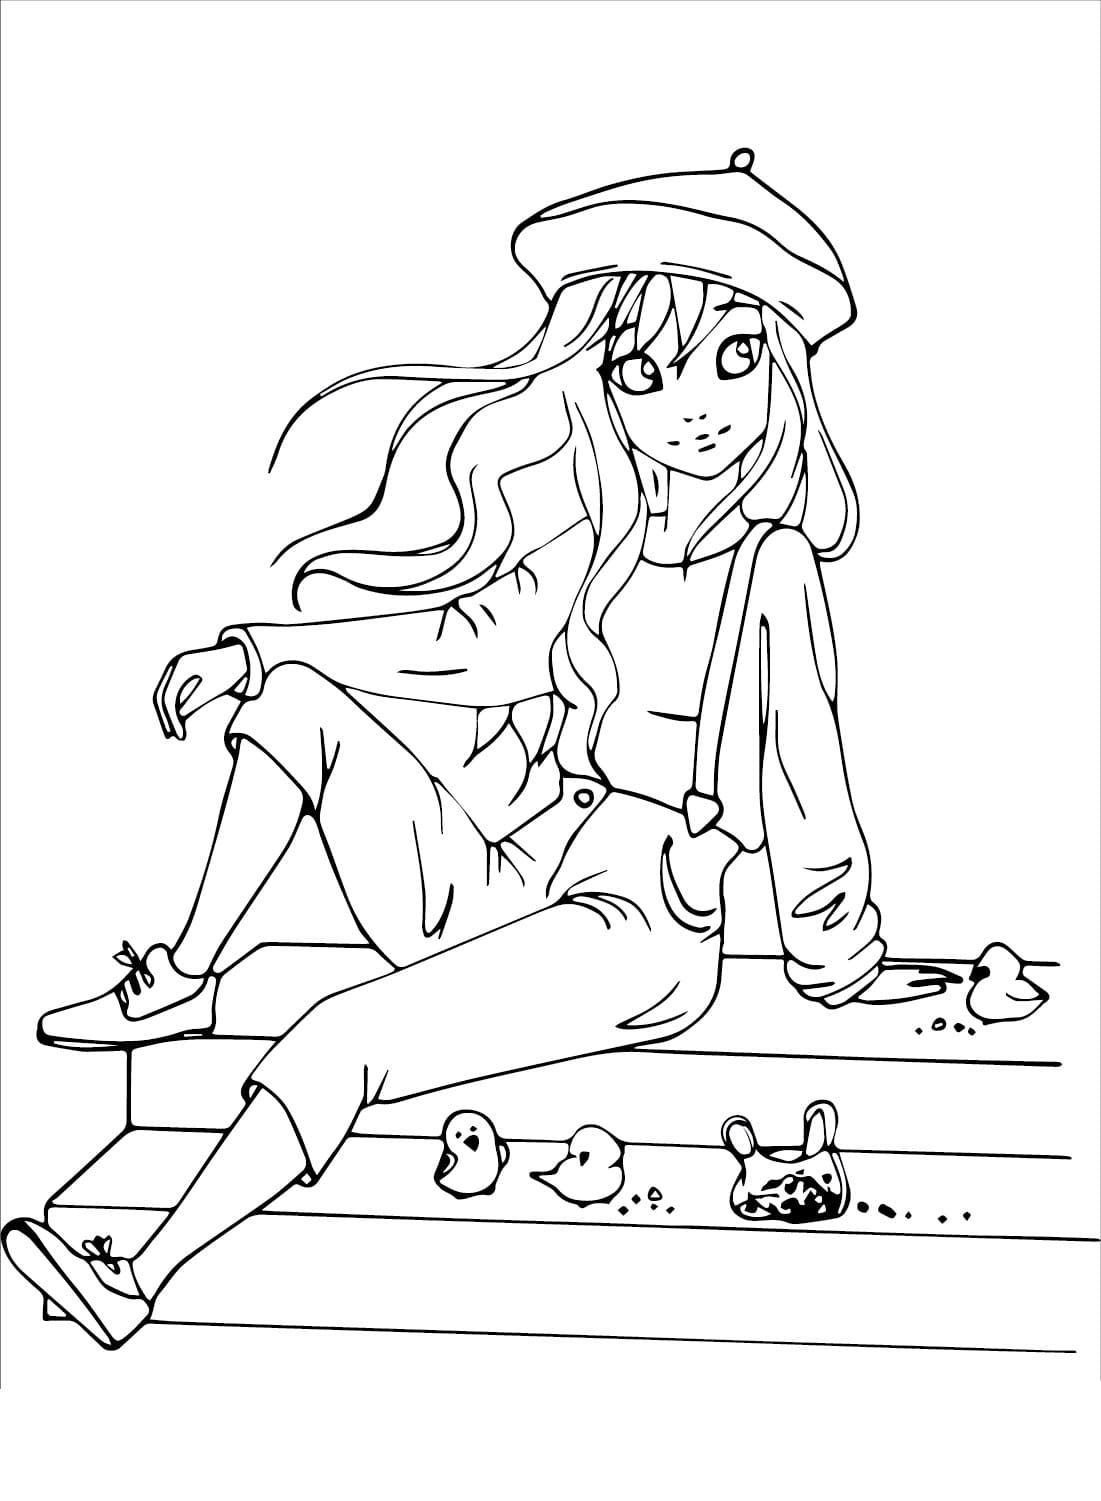 Fille Ado Imprimable coloring page